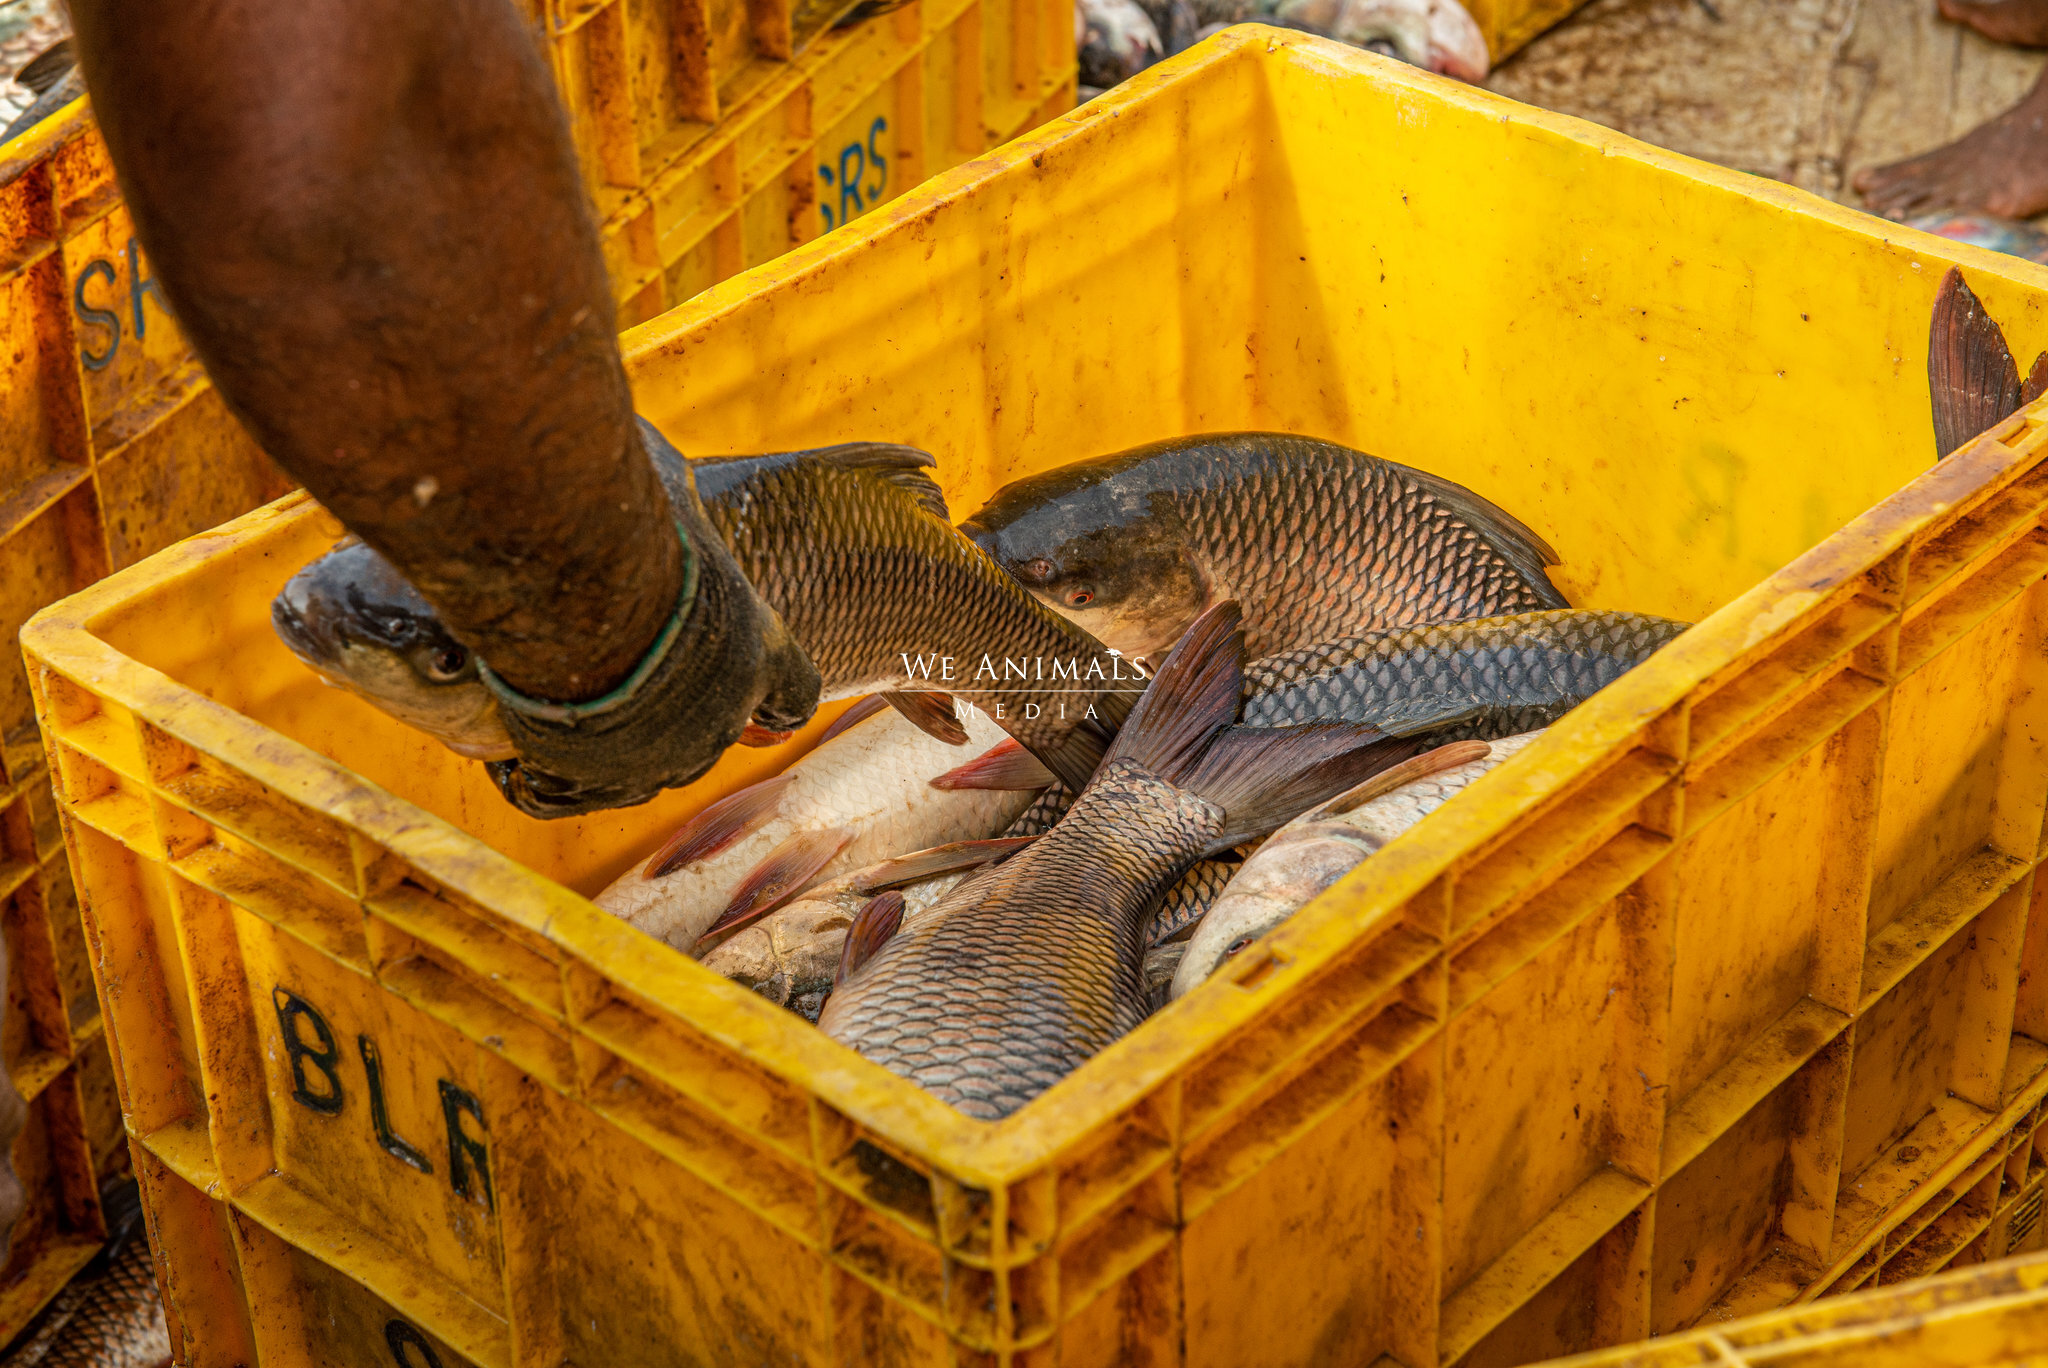 We Animals Media  A trader grasps a recently harvested live fish from a  crate at a fish farm. The trader is weighing fish as he selects them for  transport. This farm